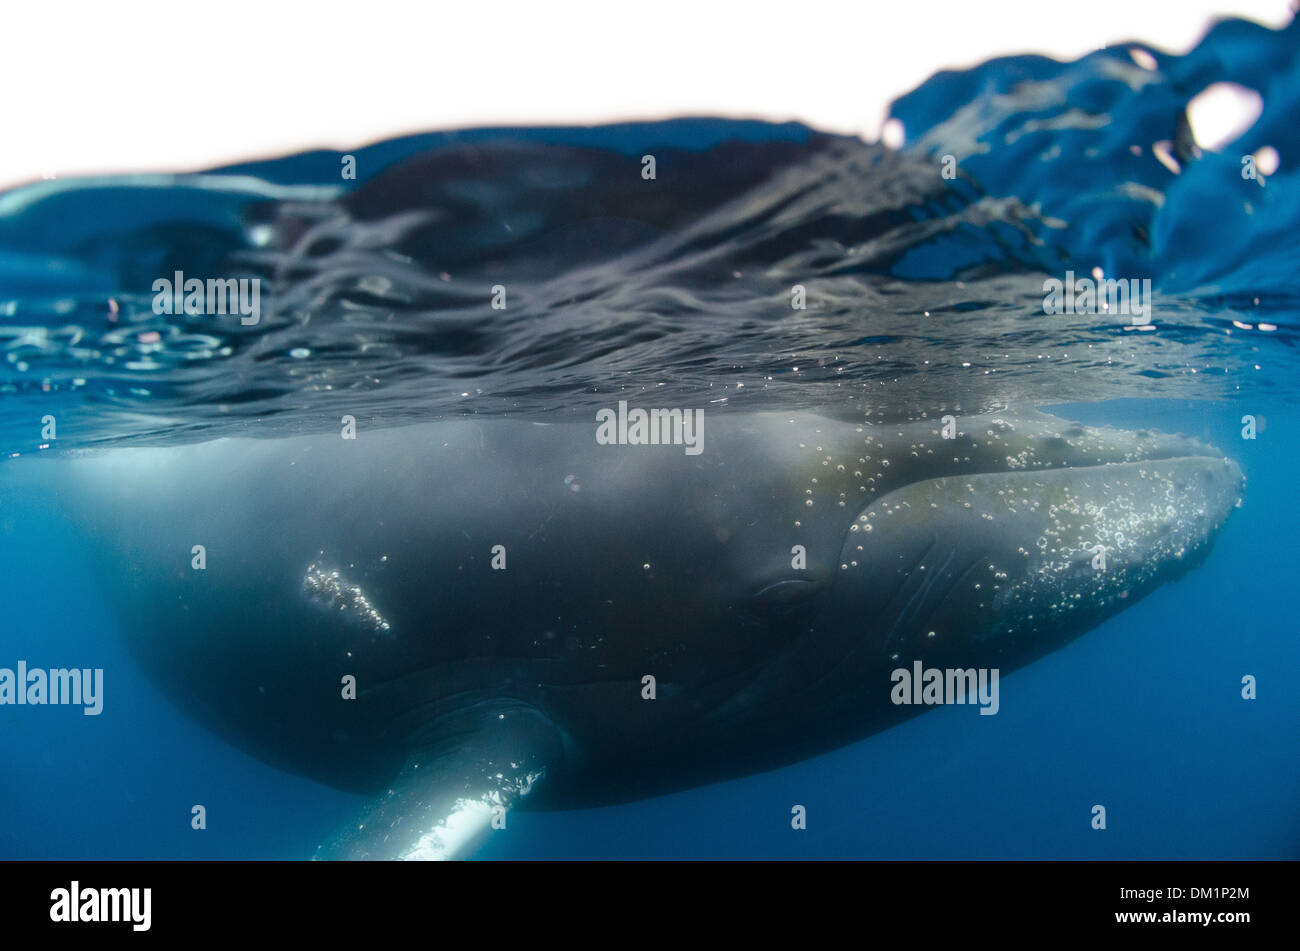 a half and half shot of a humpback whale Megaptera novaeangliae near the surface in antarctica Stock Photo